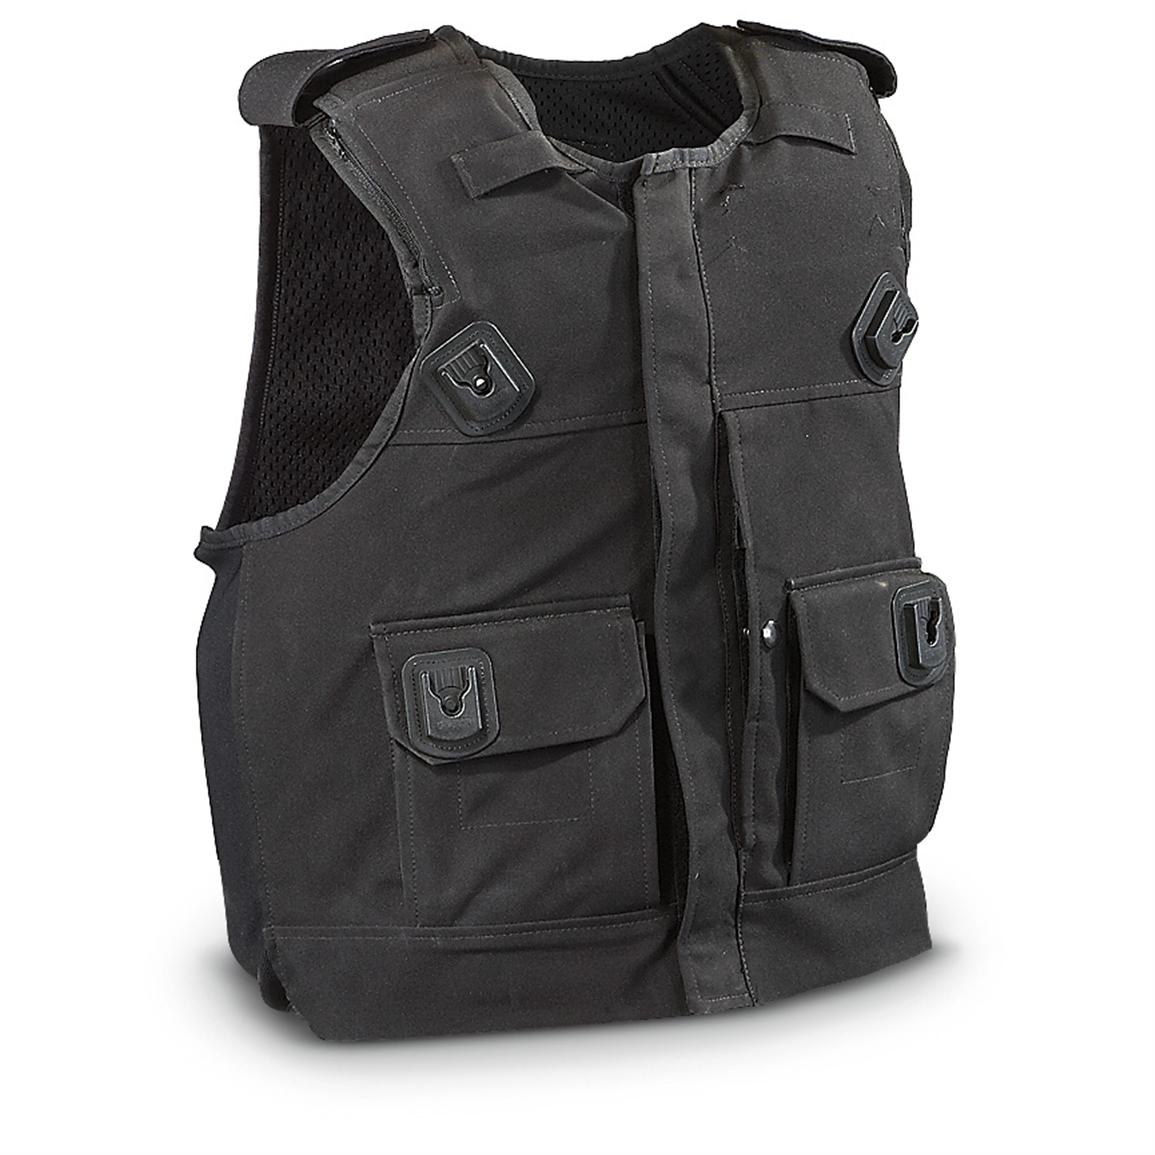 Used British Military Surplus Ballistic and Stab-proof Vest, Black - 291986, Tactical Clothing ...